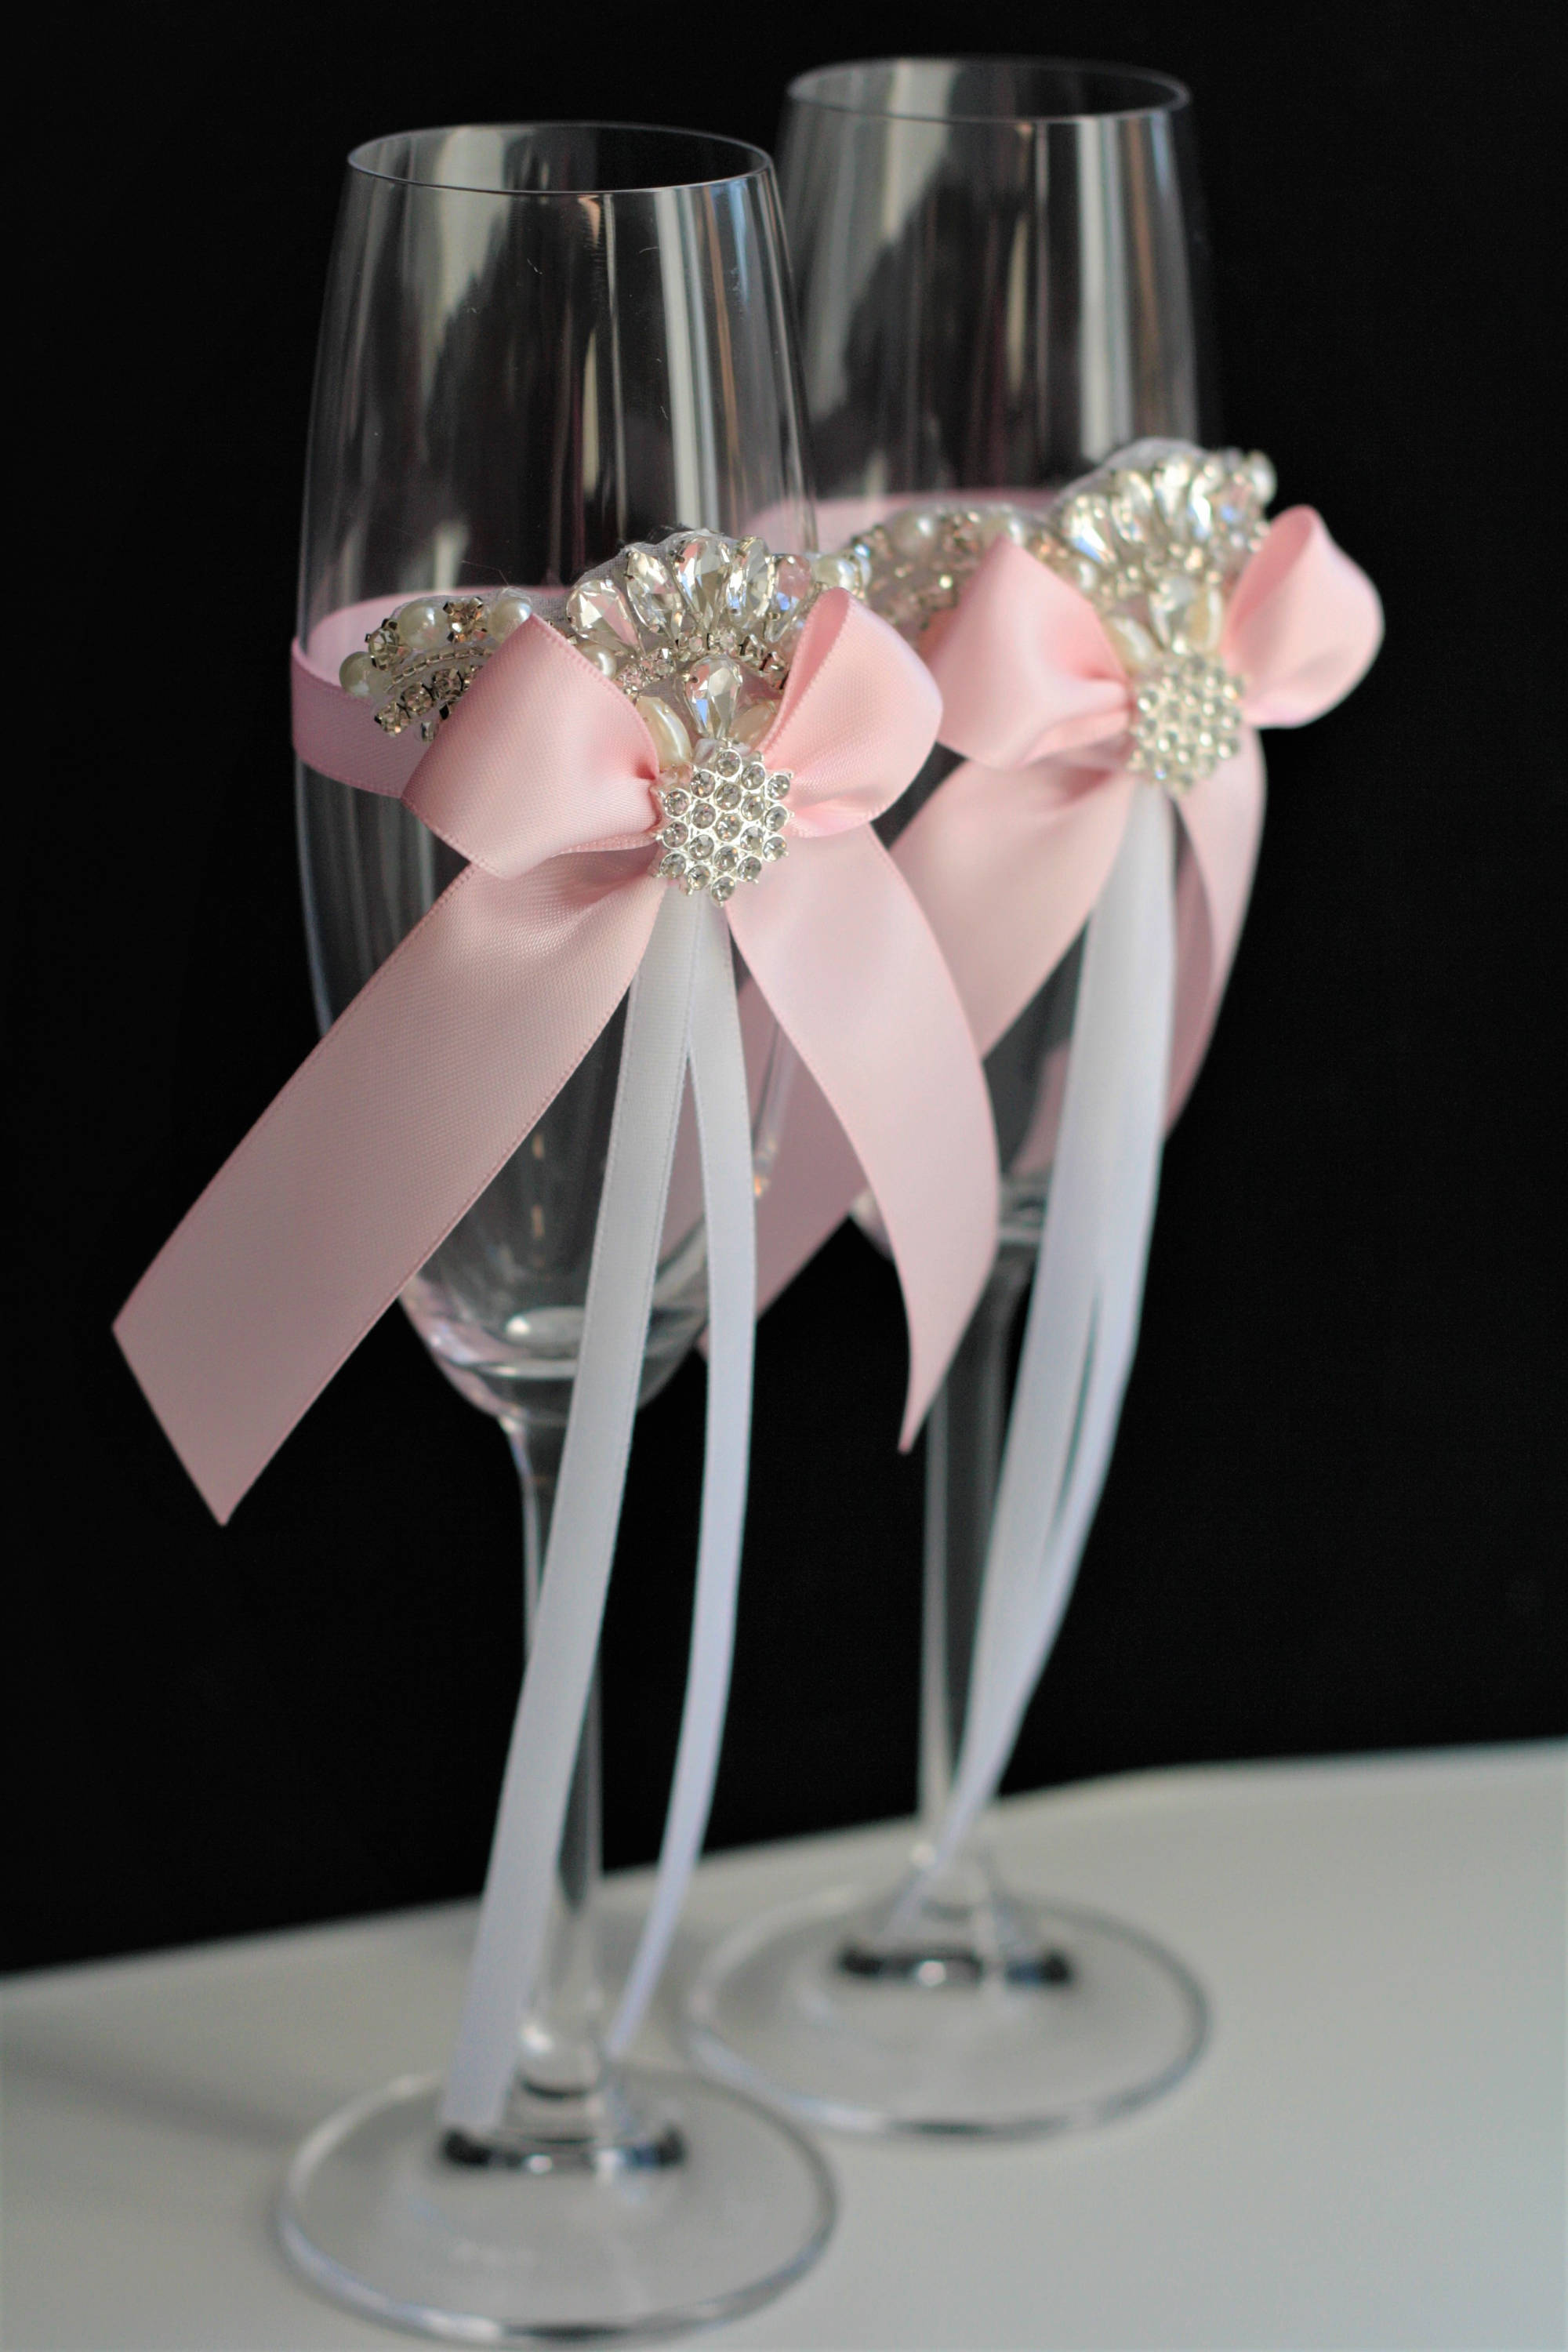 White Vintage Rose Hand Painted Champagne Flutes - 2 Flutes